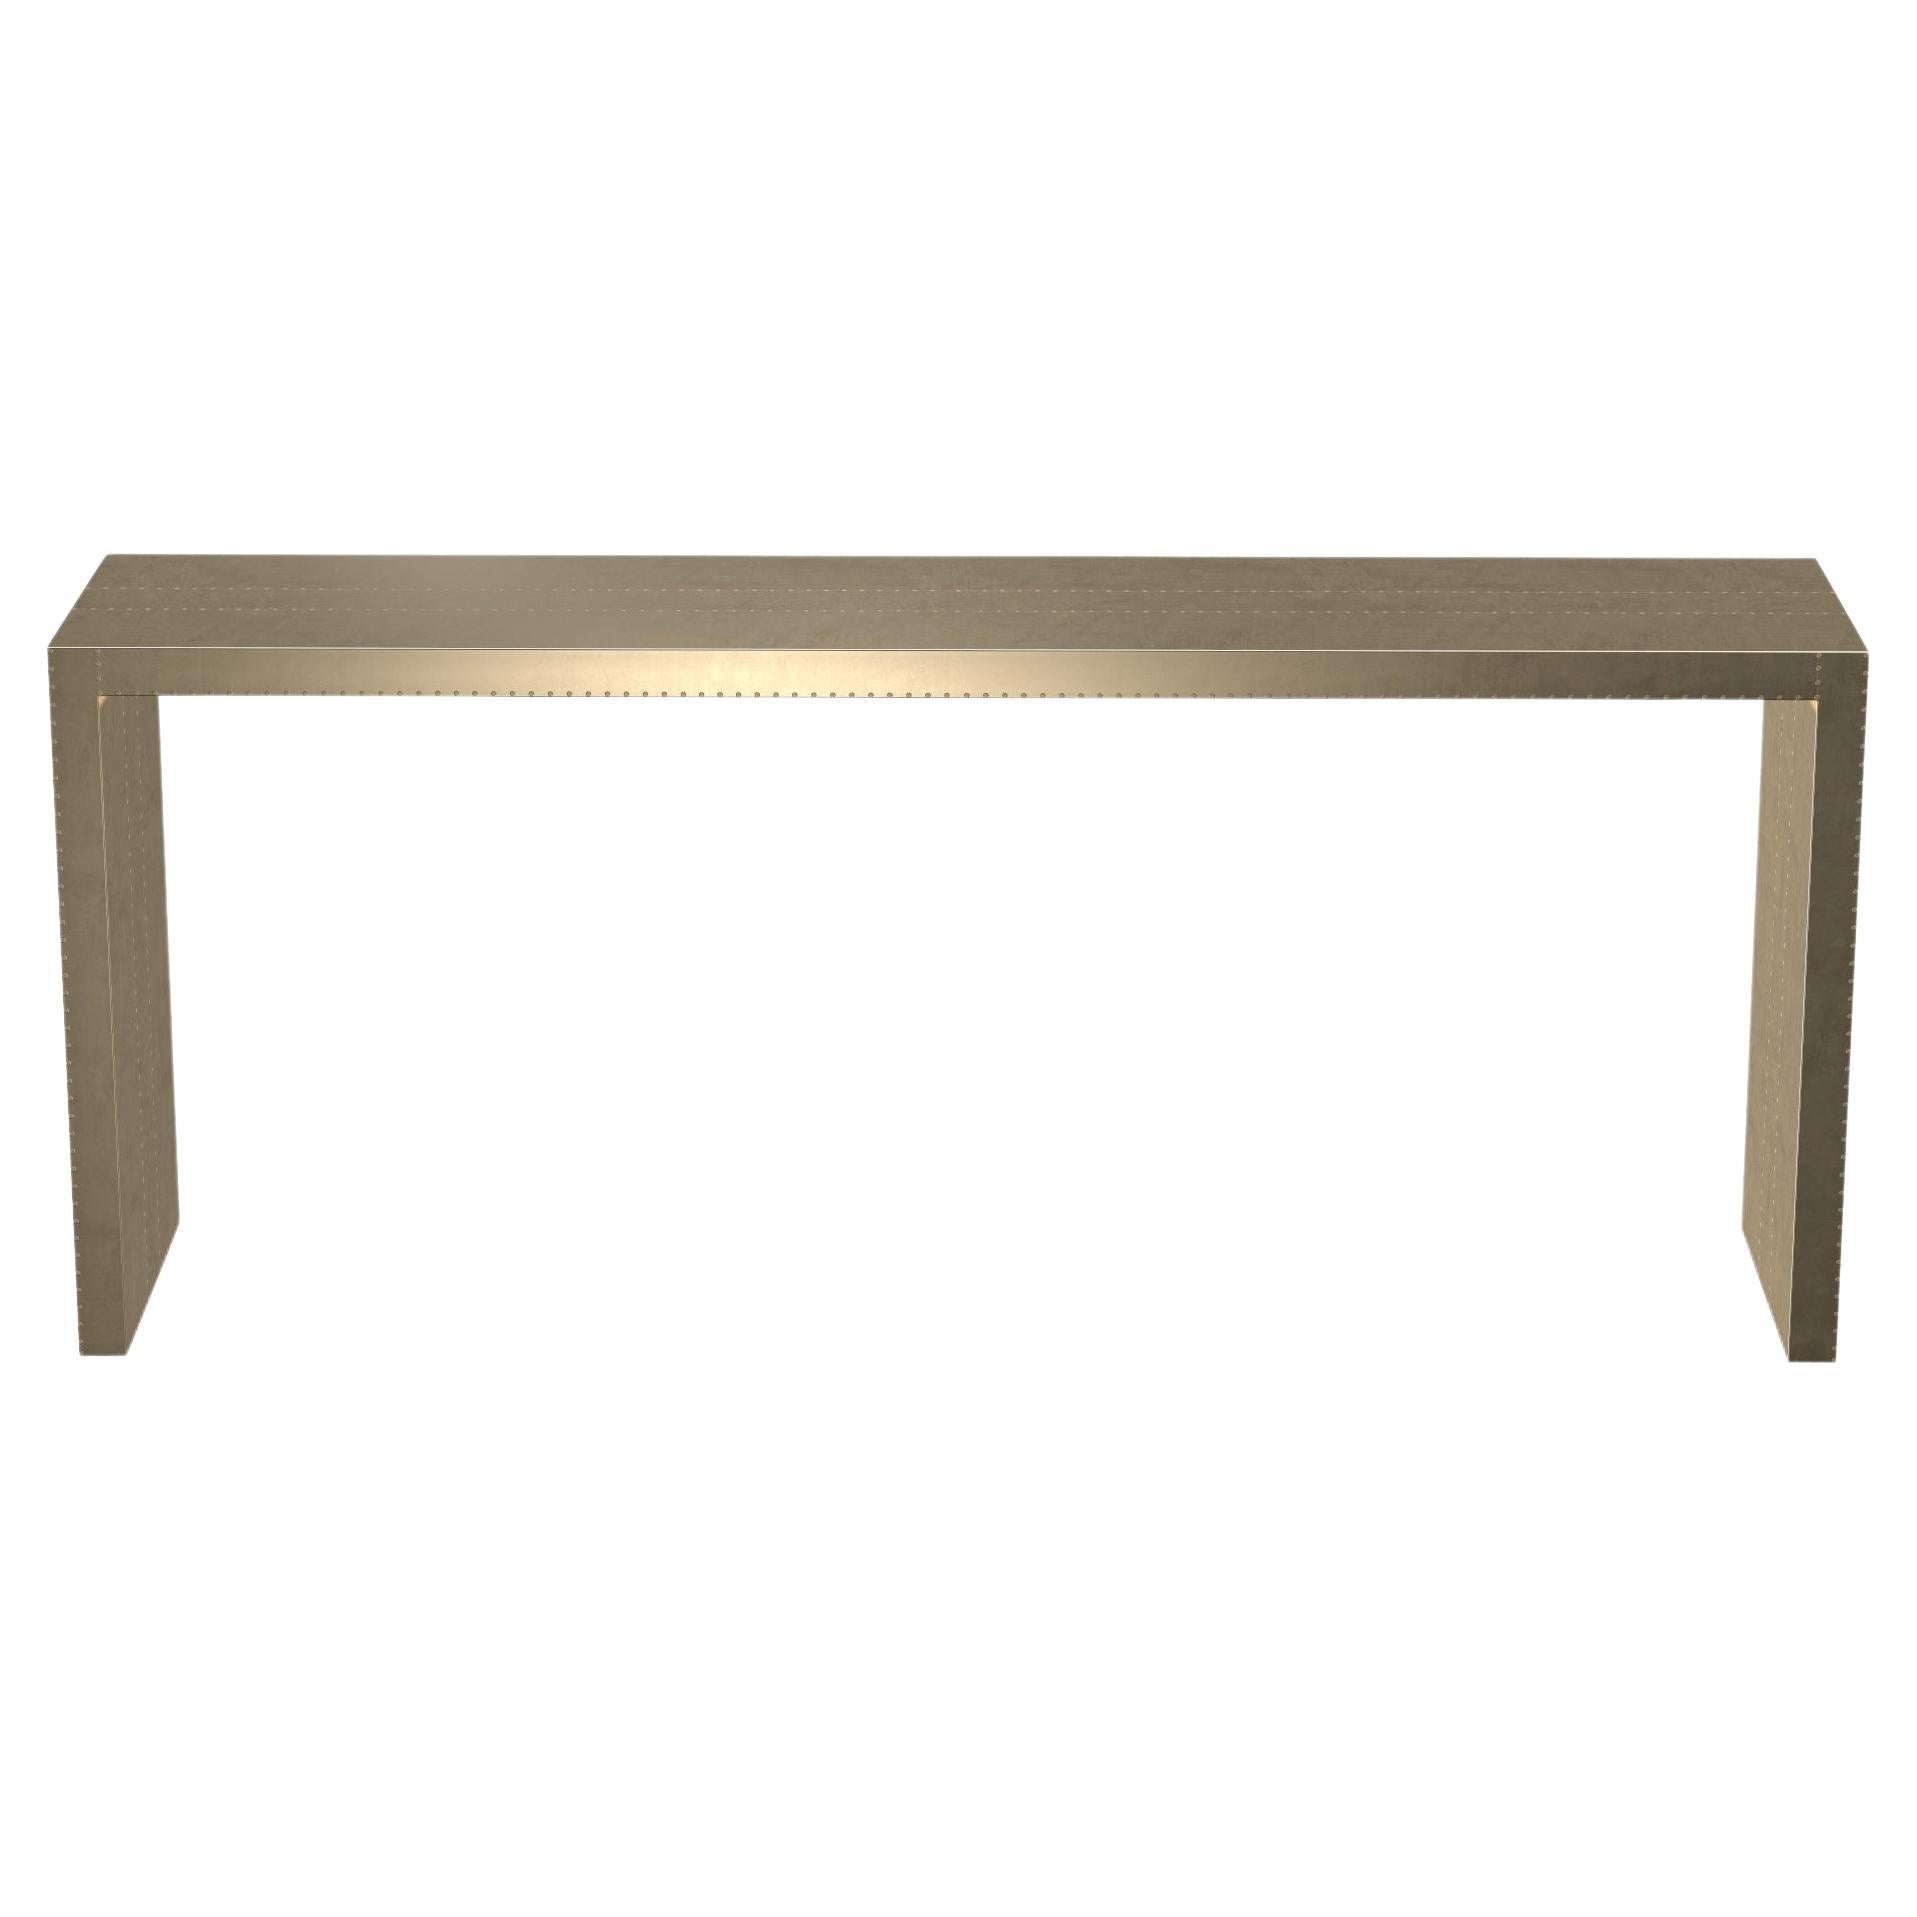 Art Deco Rectangular Console Tables Smooth Brass Bronze by Alison Spear